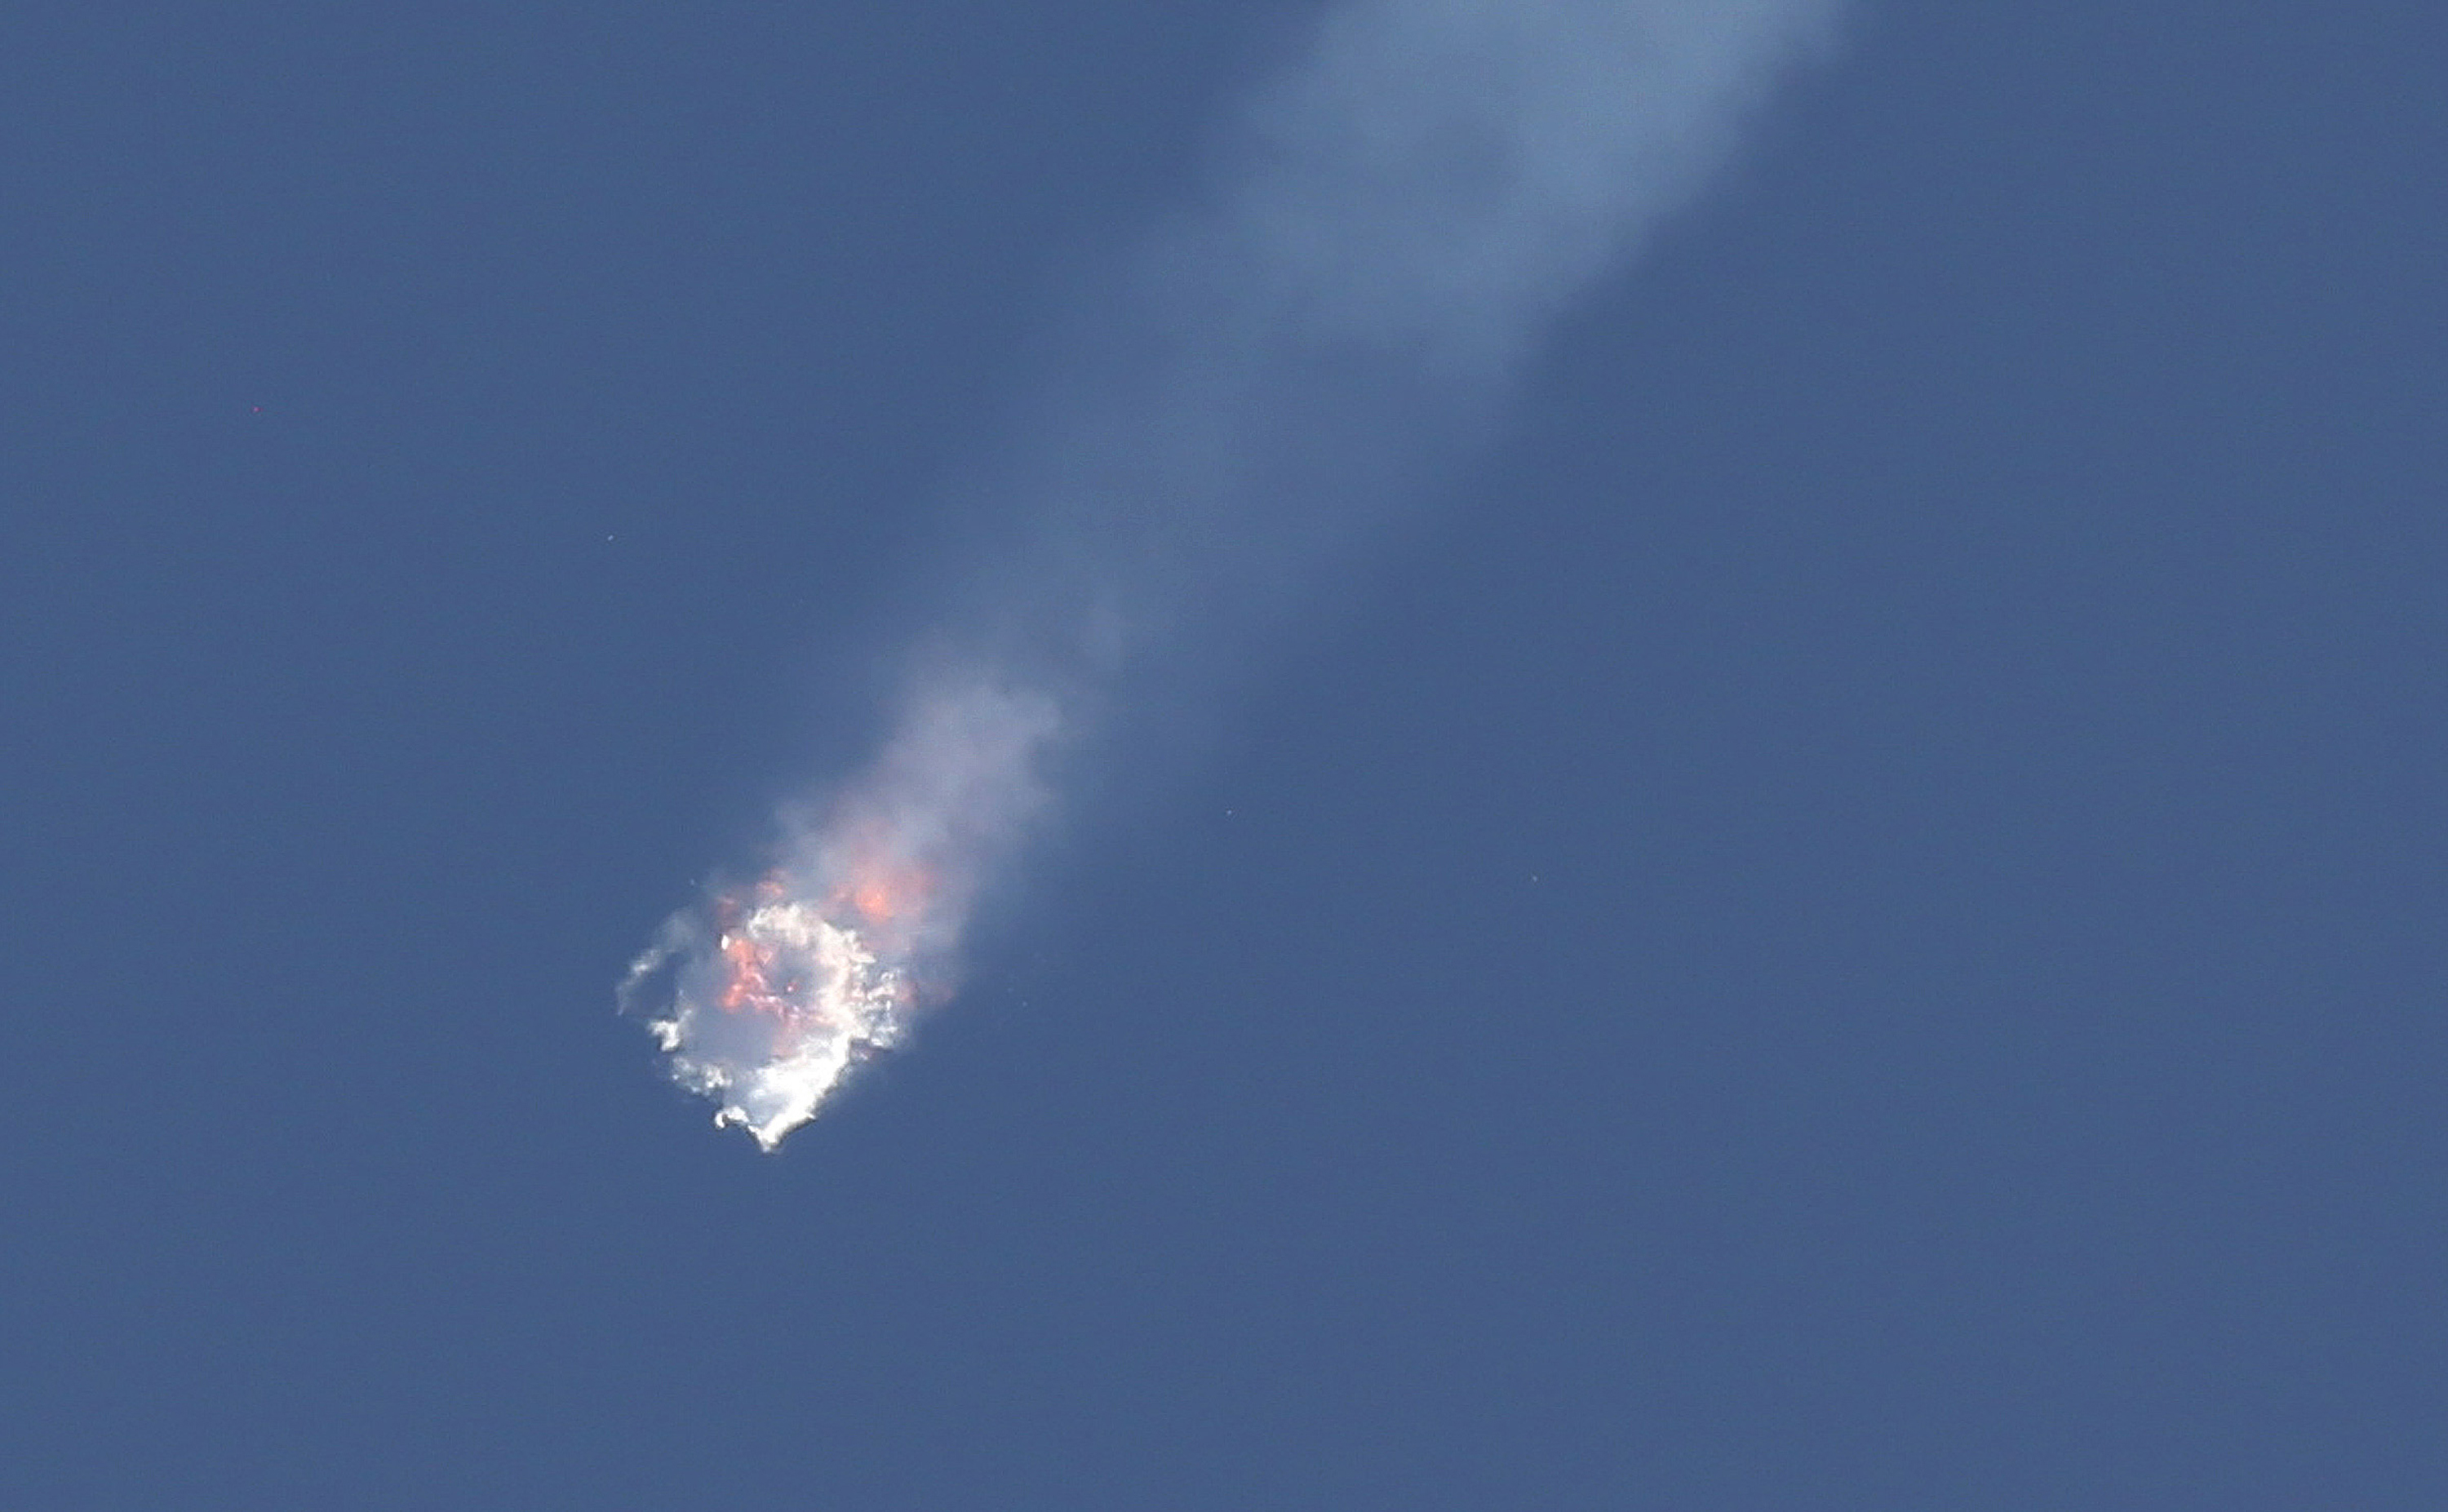 A SpaceX Falcon 9 rocket on its seventh official Commercial Resupply mission to the orbiting International Space Station explodes on June 28, 2015, after launching from Launch Complex 40 at the Cape Canaveral Air Force Station in Florida. (Red Huber—Orlando Sentinel/TNS/Getty Images)